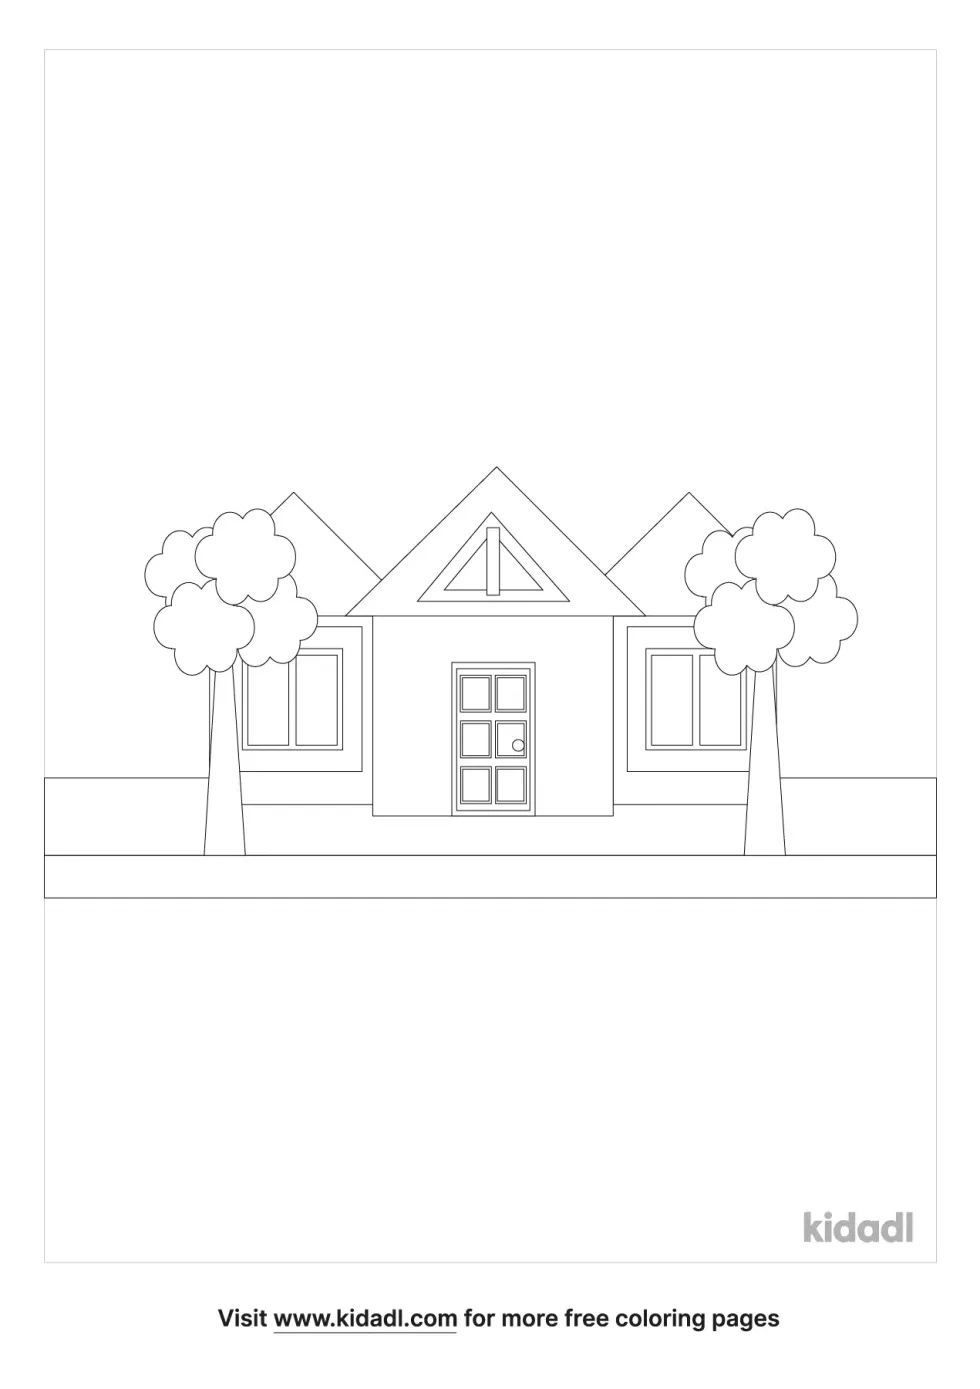 Suburban Community Coloring Page